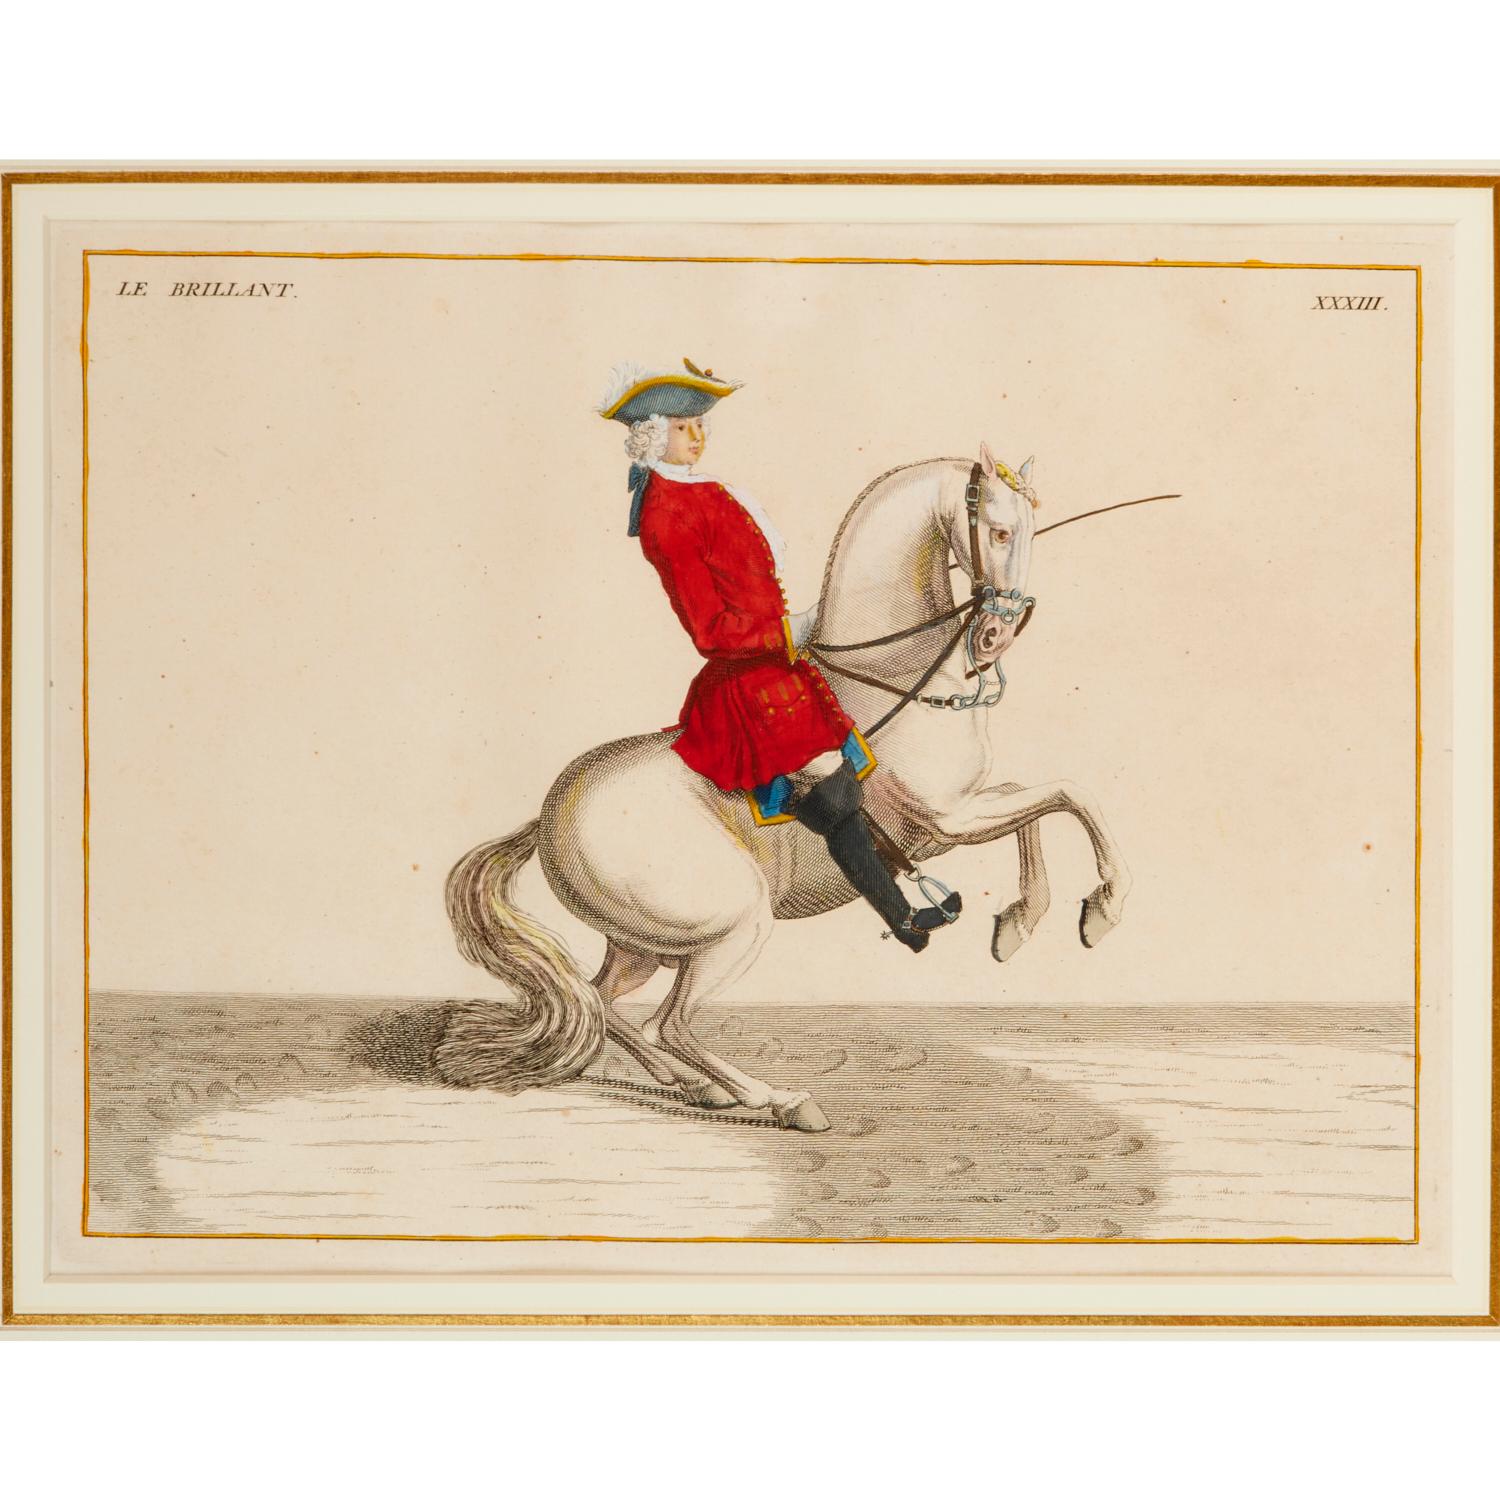 18th century German, a hand-colored engraving of a dressage horse and rider from Description du Manège Moderne by Friedrich Wilhelm, Baron Rais d' Eisenberg (German, ca. 1700-ca. 1770). Engraved by Bernard Picart (French, 1673-1733).  Titled 